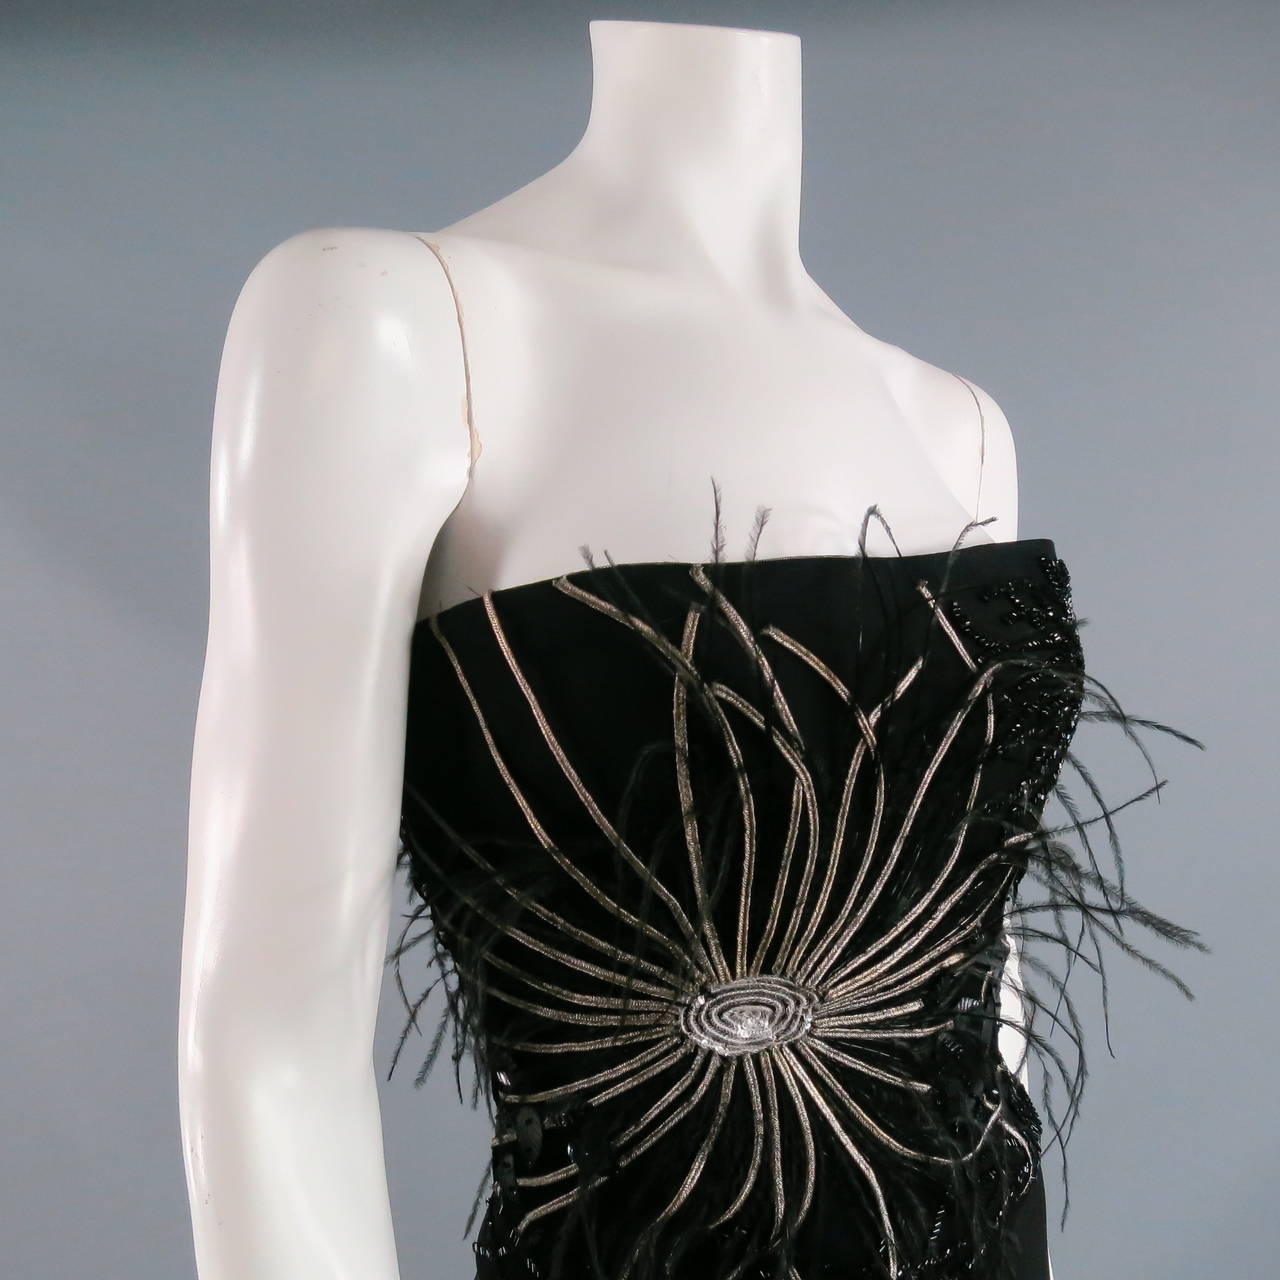 Sexy, stunning strapless dress by RICHARD TYLER.  Full length in black jersey.  Intricate detailing through bodice including beads, feathers and braided, metallic ribbon.  Feathers take on their own whispy movement as you move.  High slit at left. 